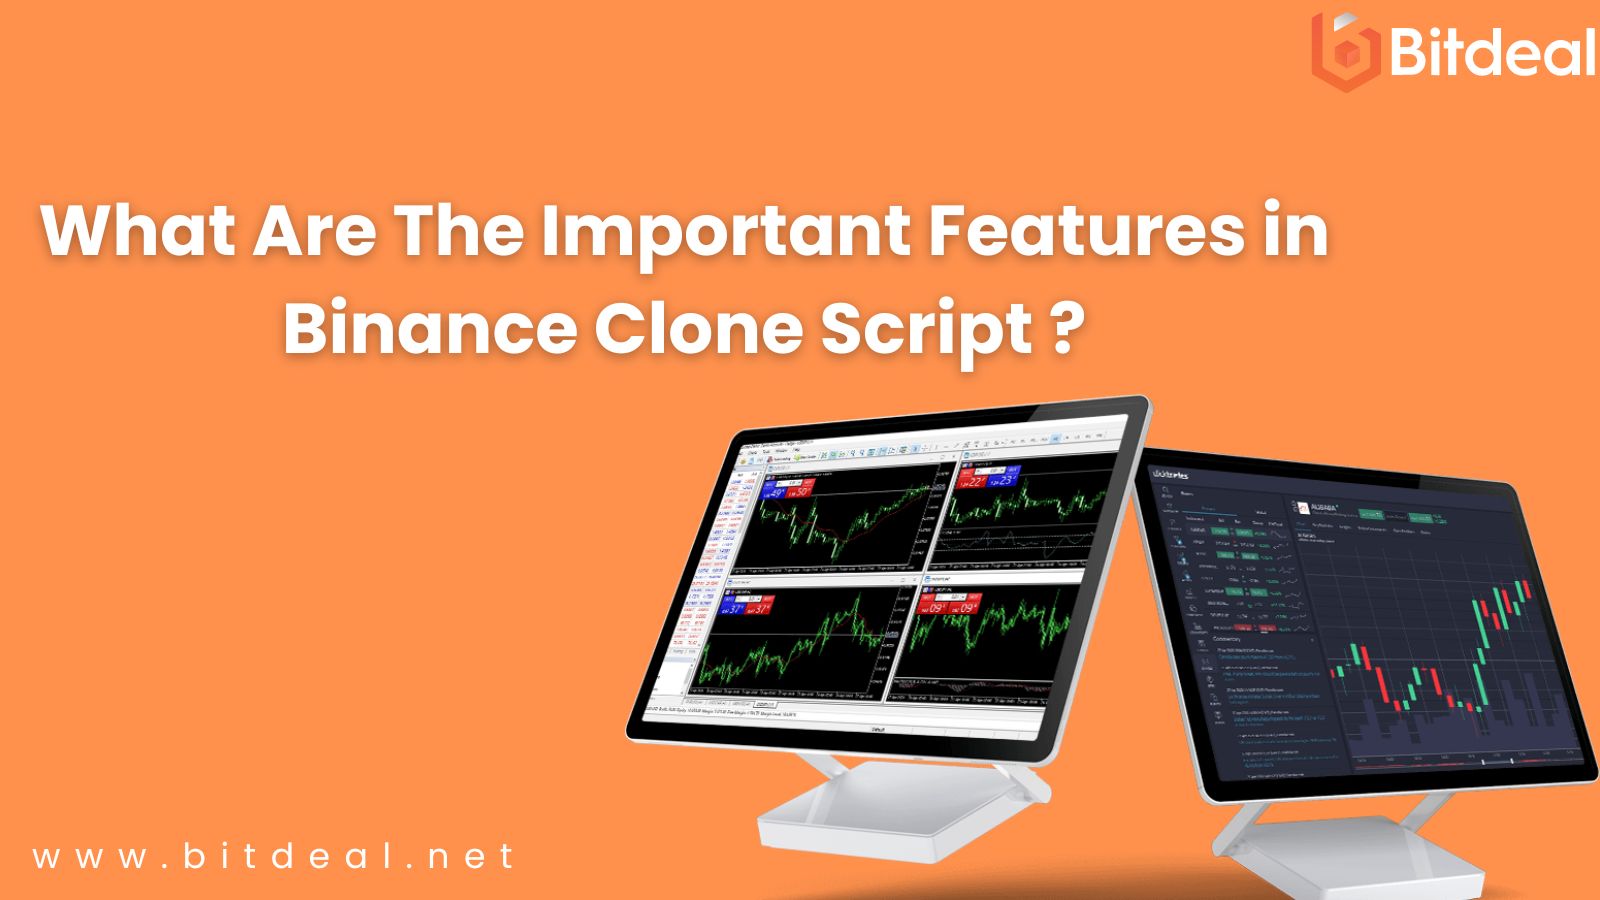 What Are The Important Features in Binance Clone Script ?